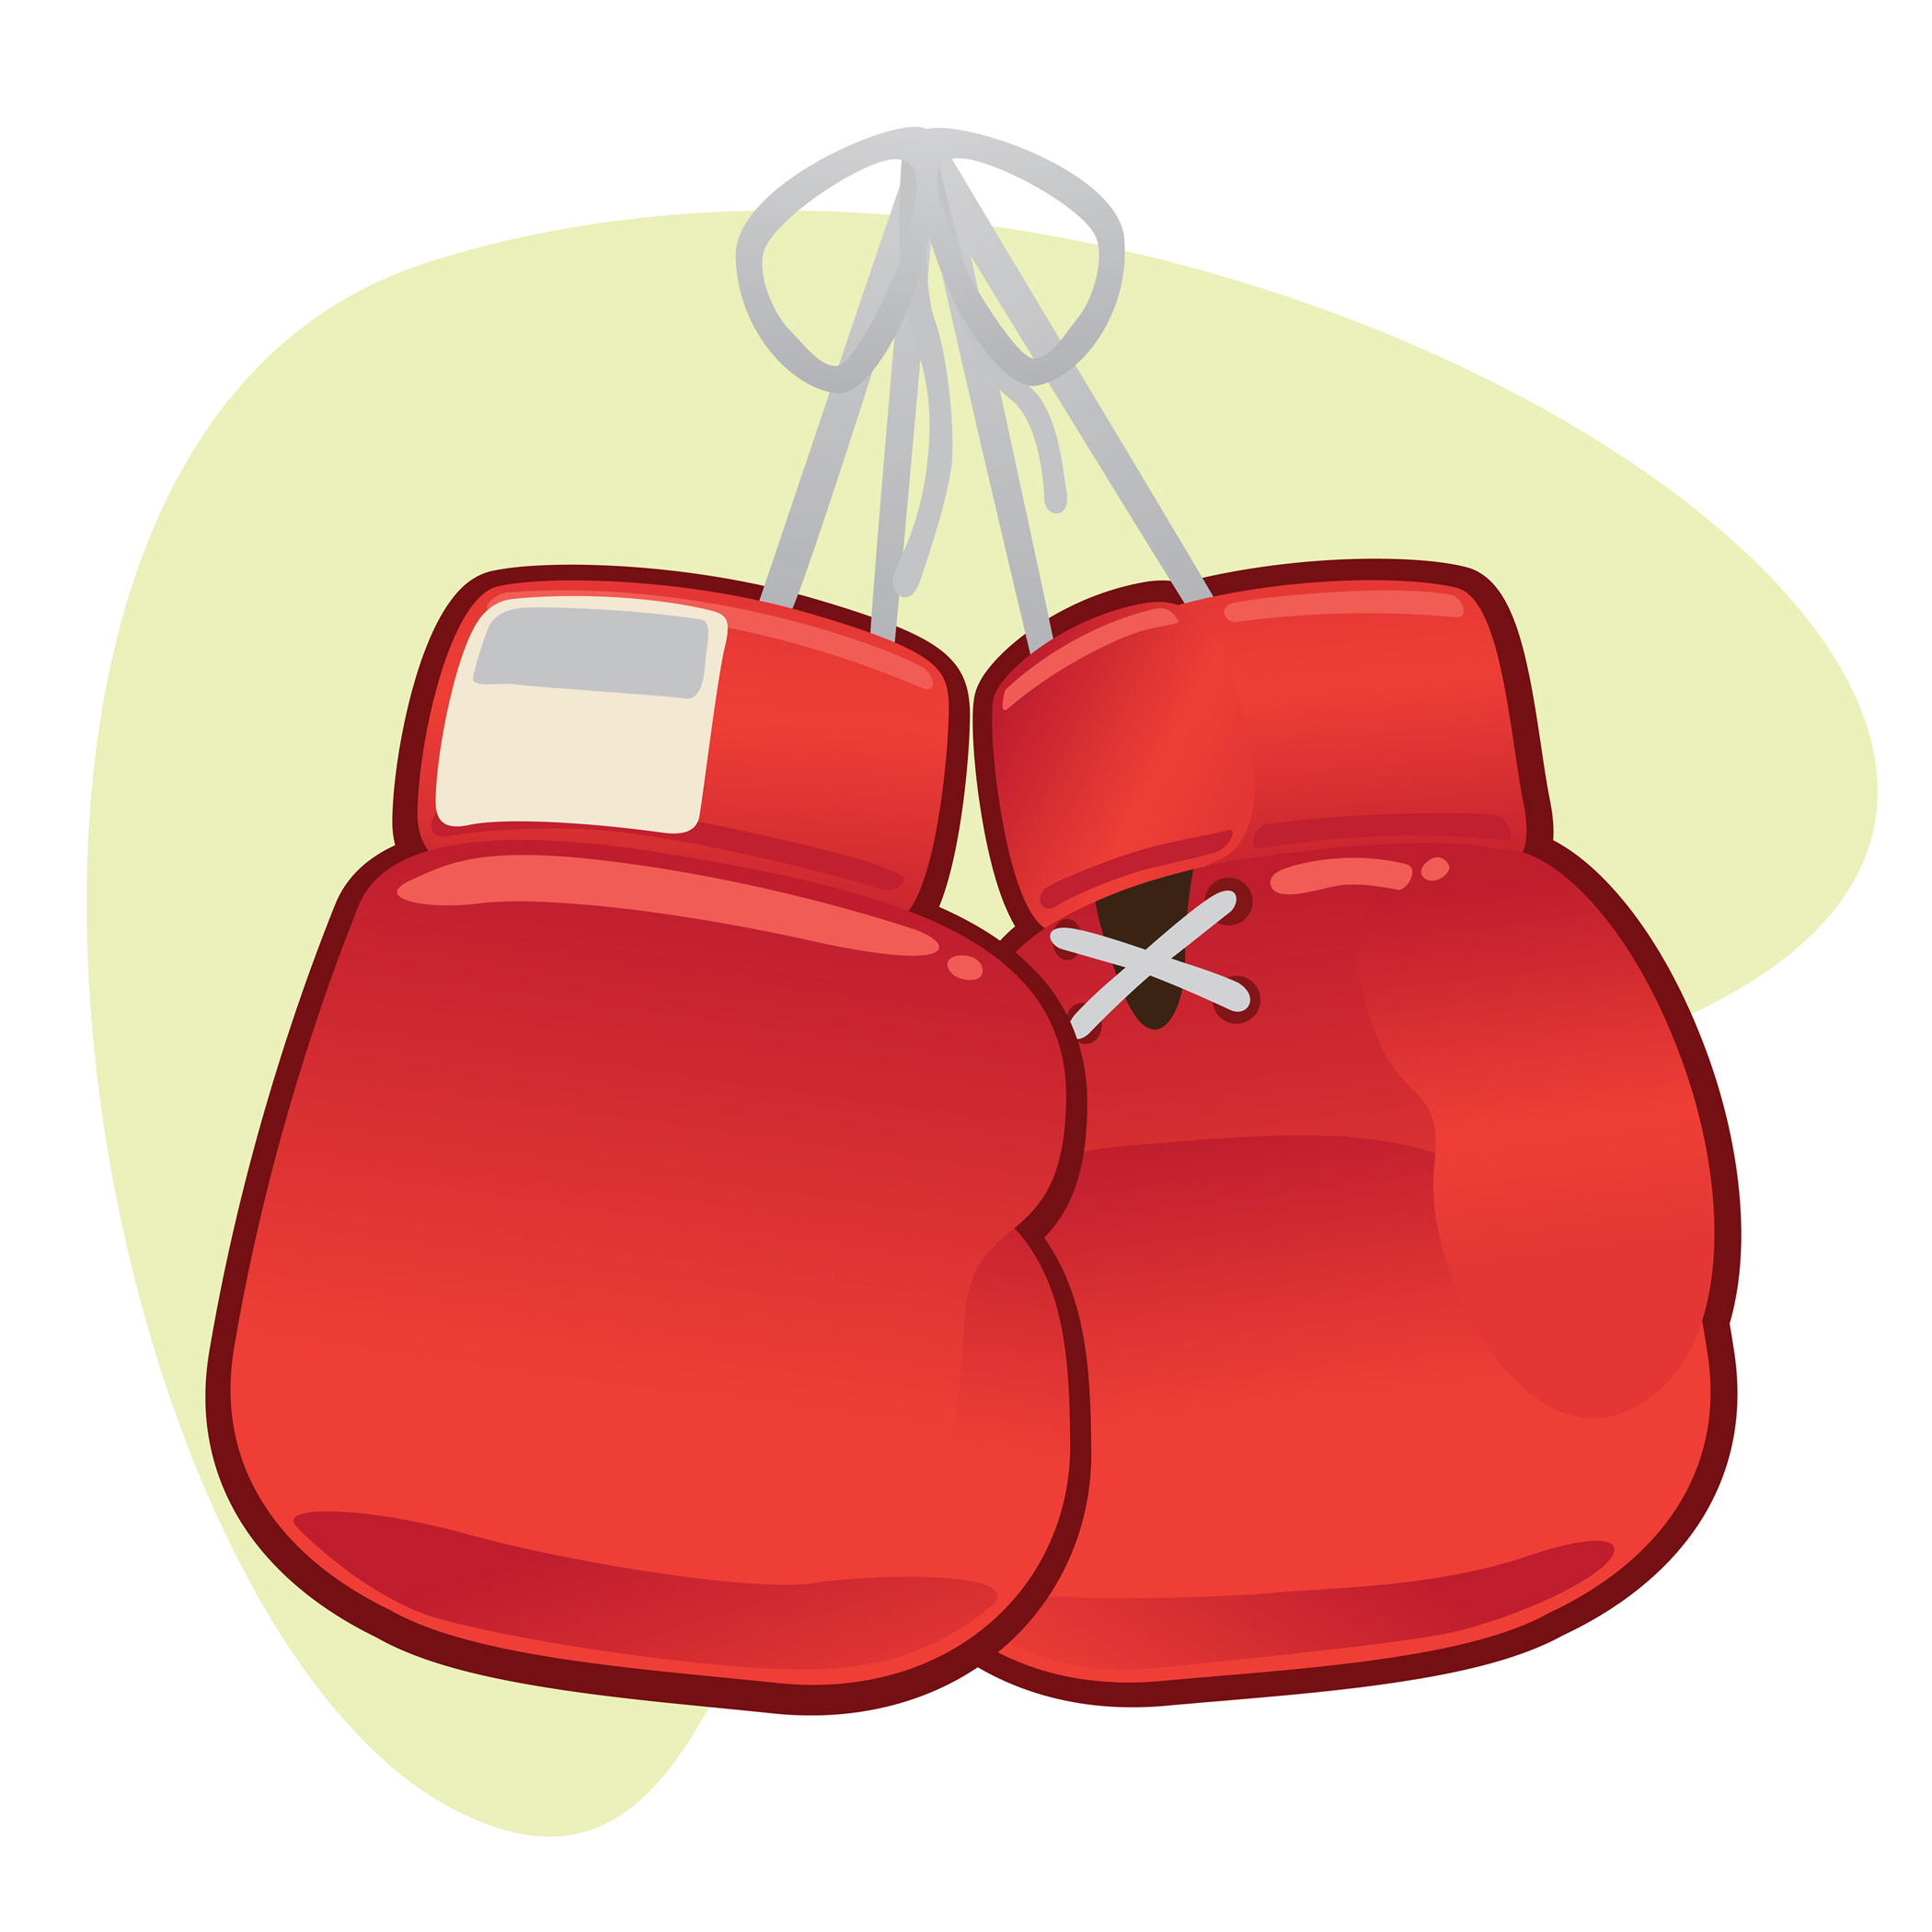 Boxing Glove Images - ClipArt Best